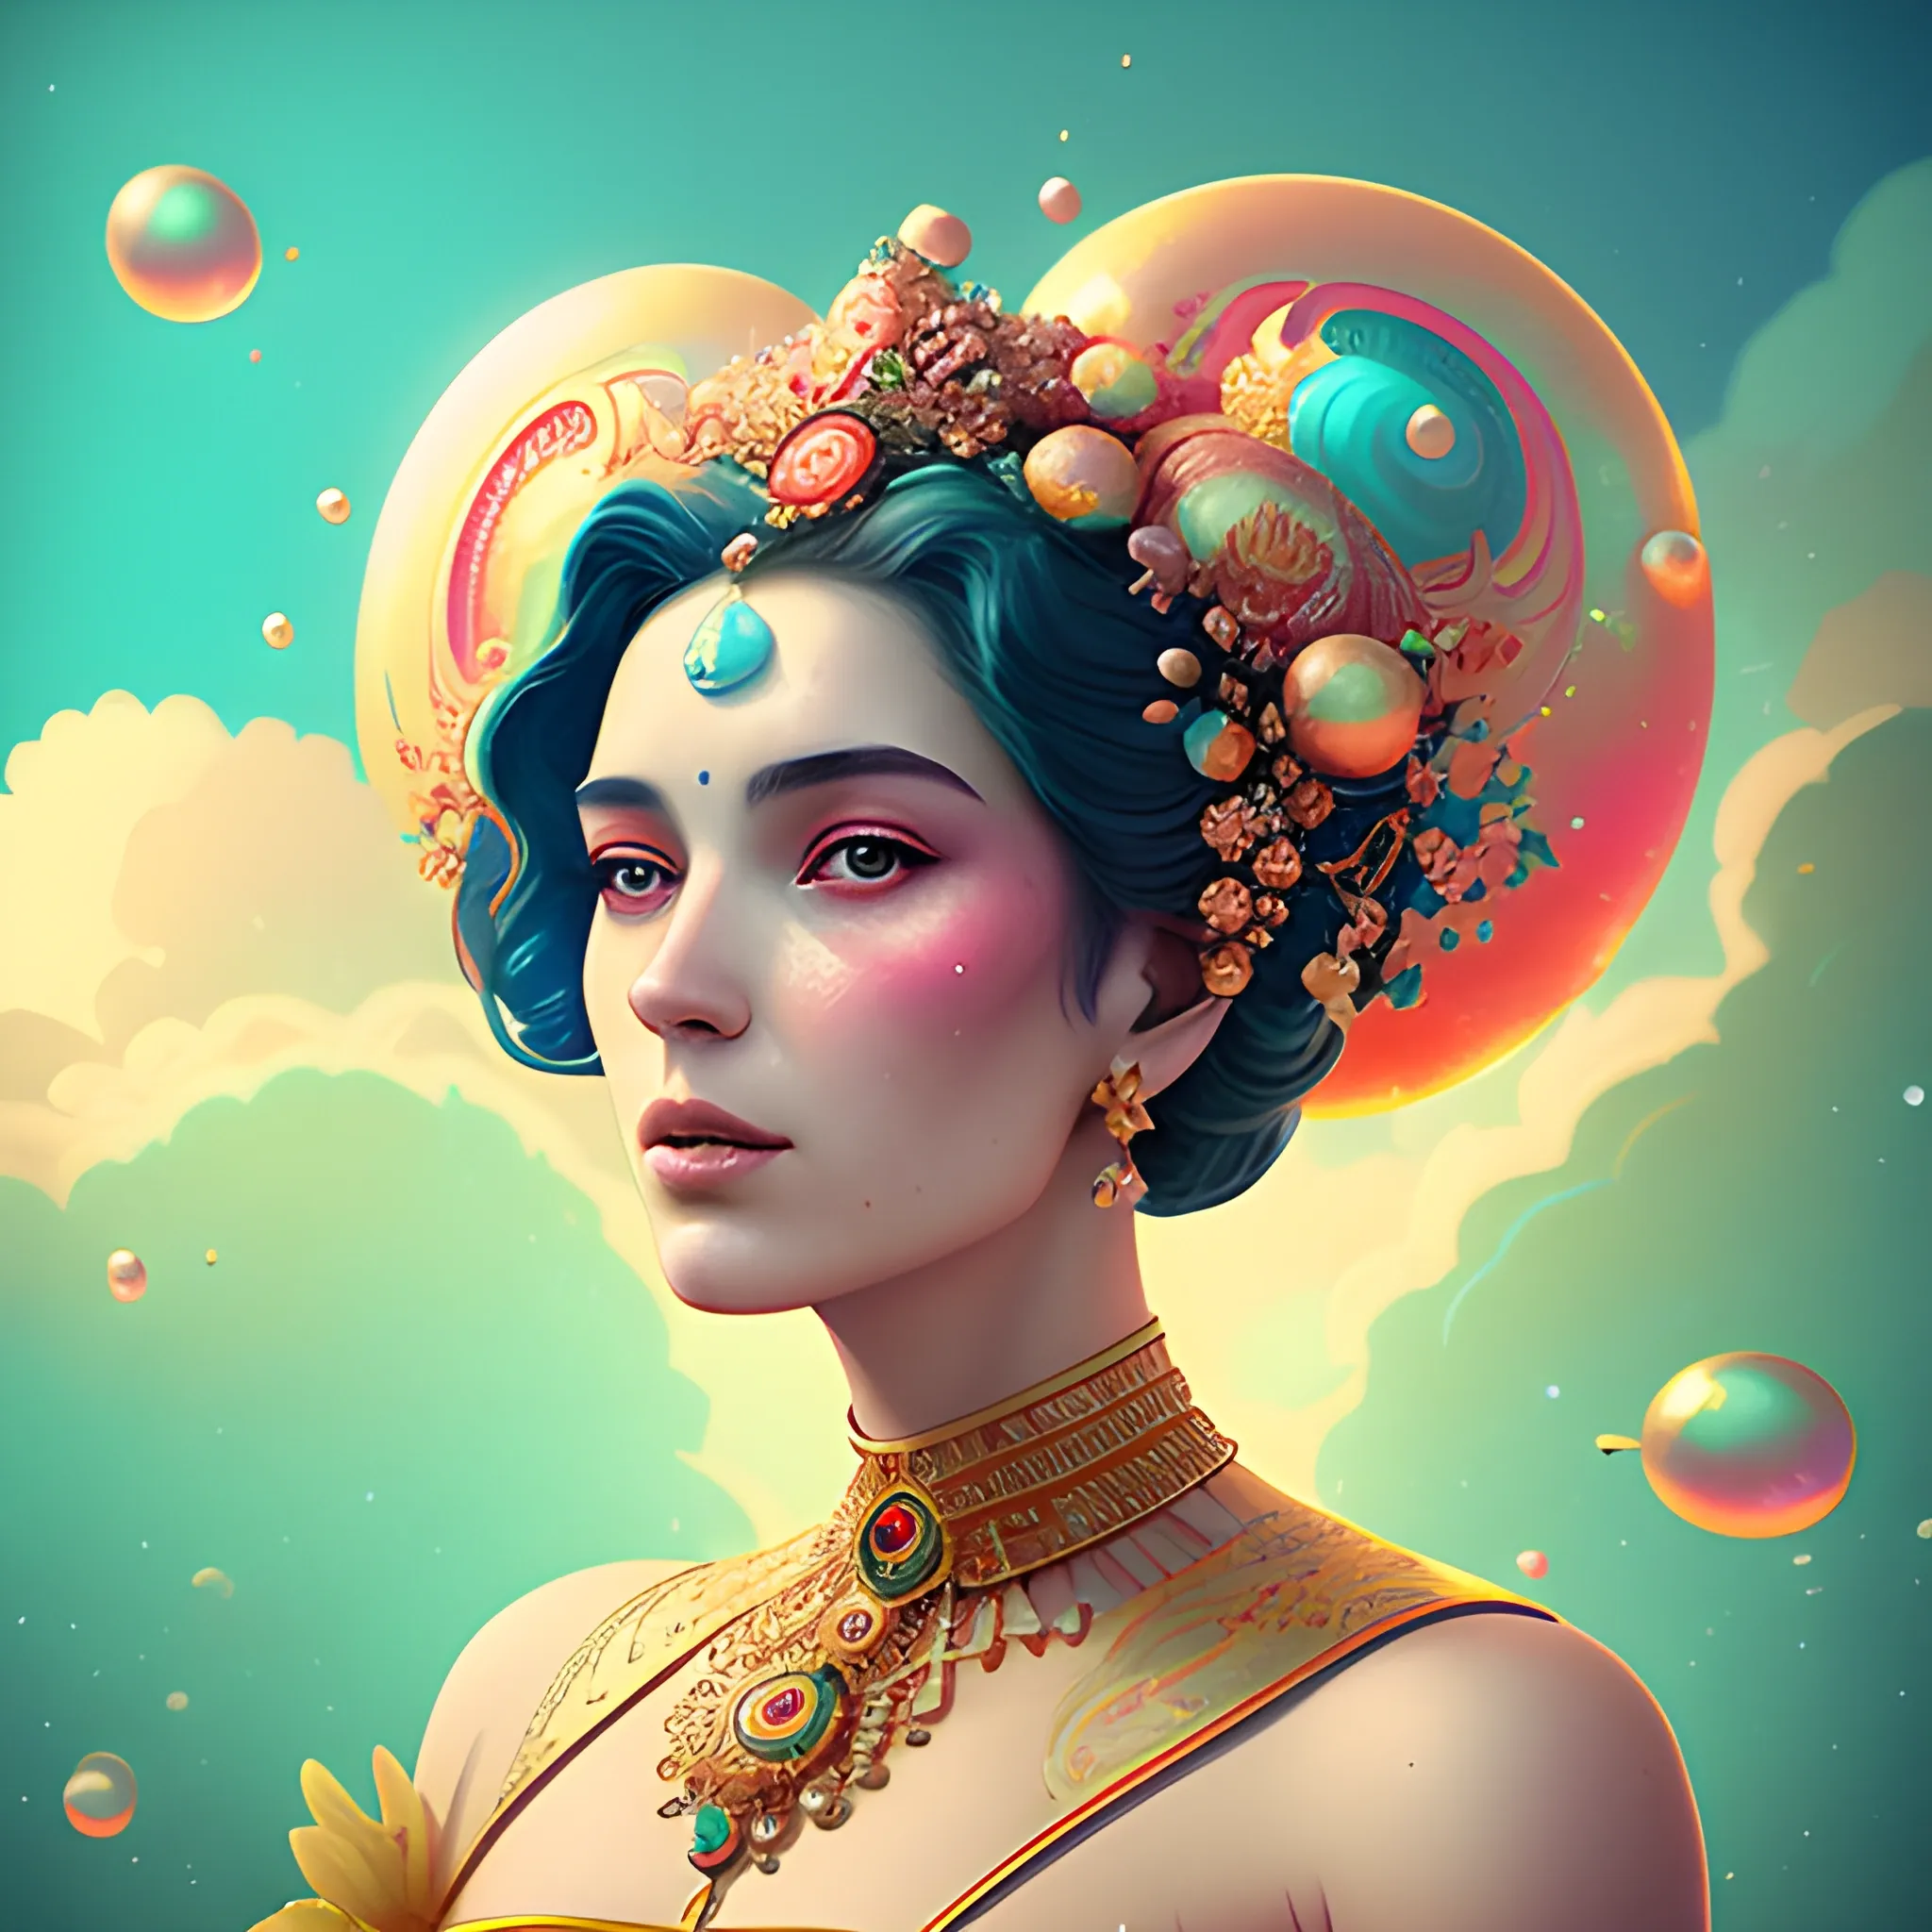 Flowery beautiful face and shoulders of an empress with gold jewellery, by petros afshar, ross tran, Tom Bagshaw, tom whalen, underwater bubbly psychedelic clouds, Anaglyph 3D lens blur effect